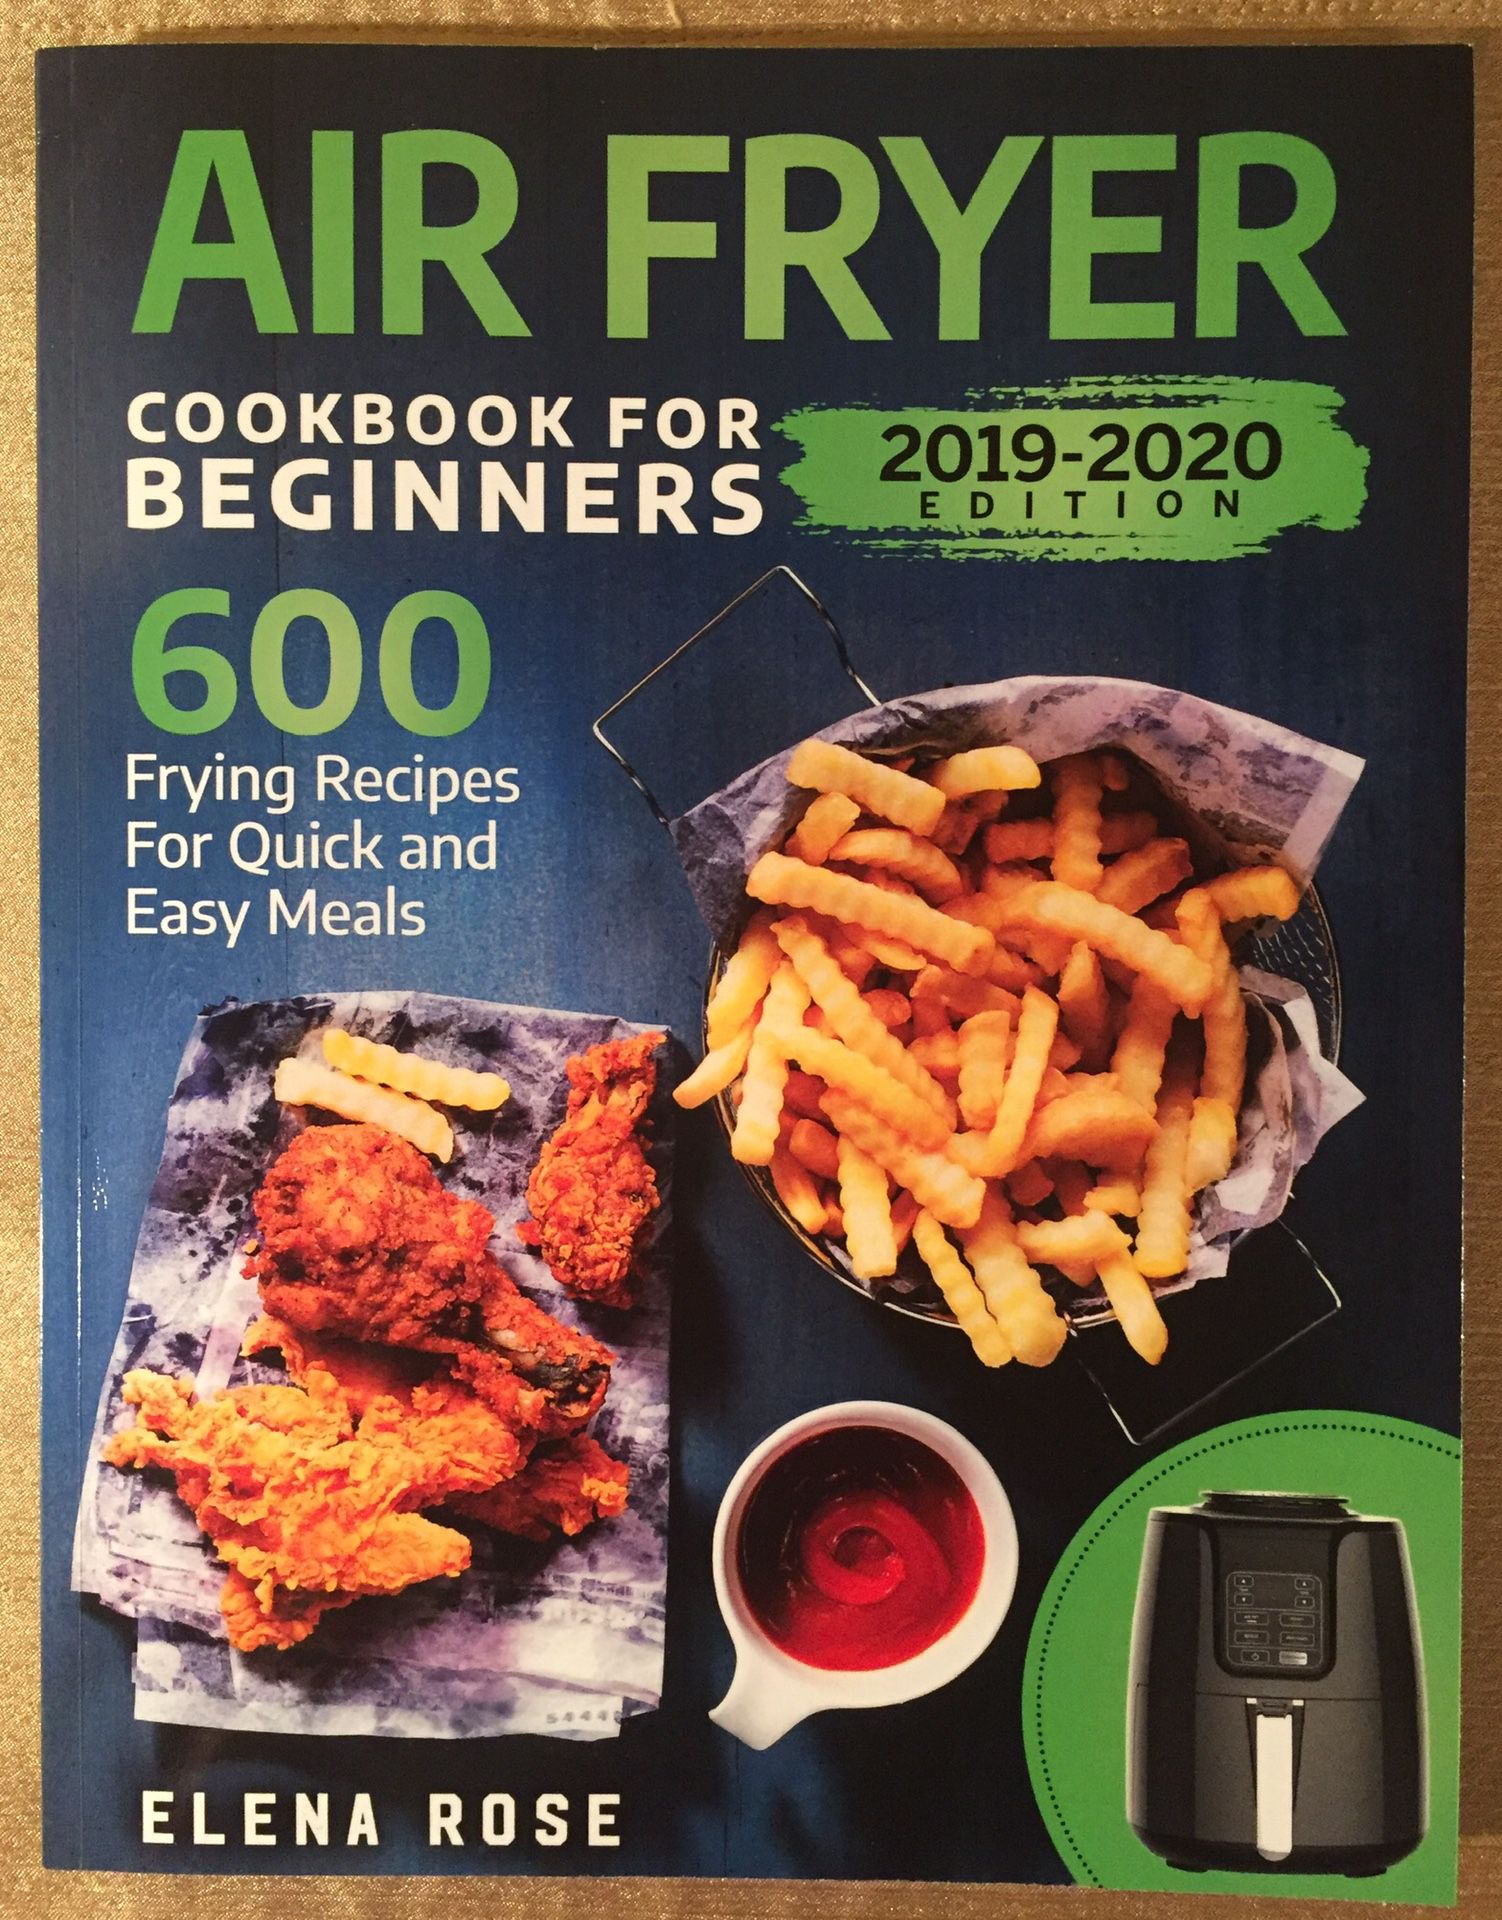 AIR FRYER COOKBOOK FOR BEGINNERS 600 RECIPES 2019-2020 EDITION BRAND NEW